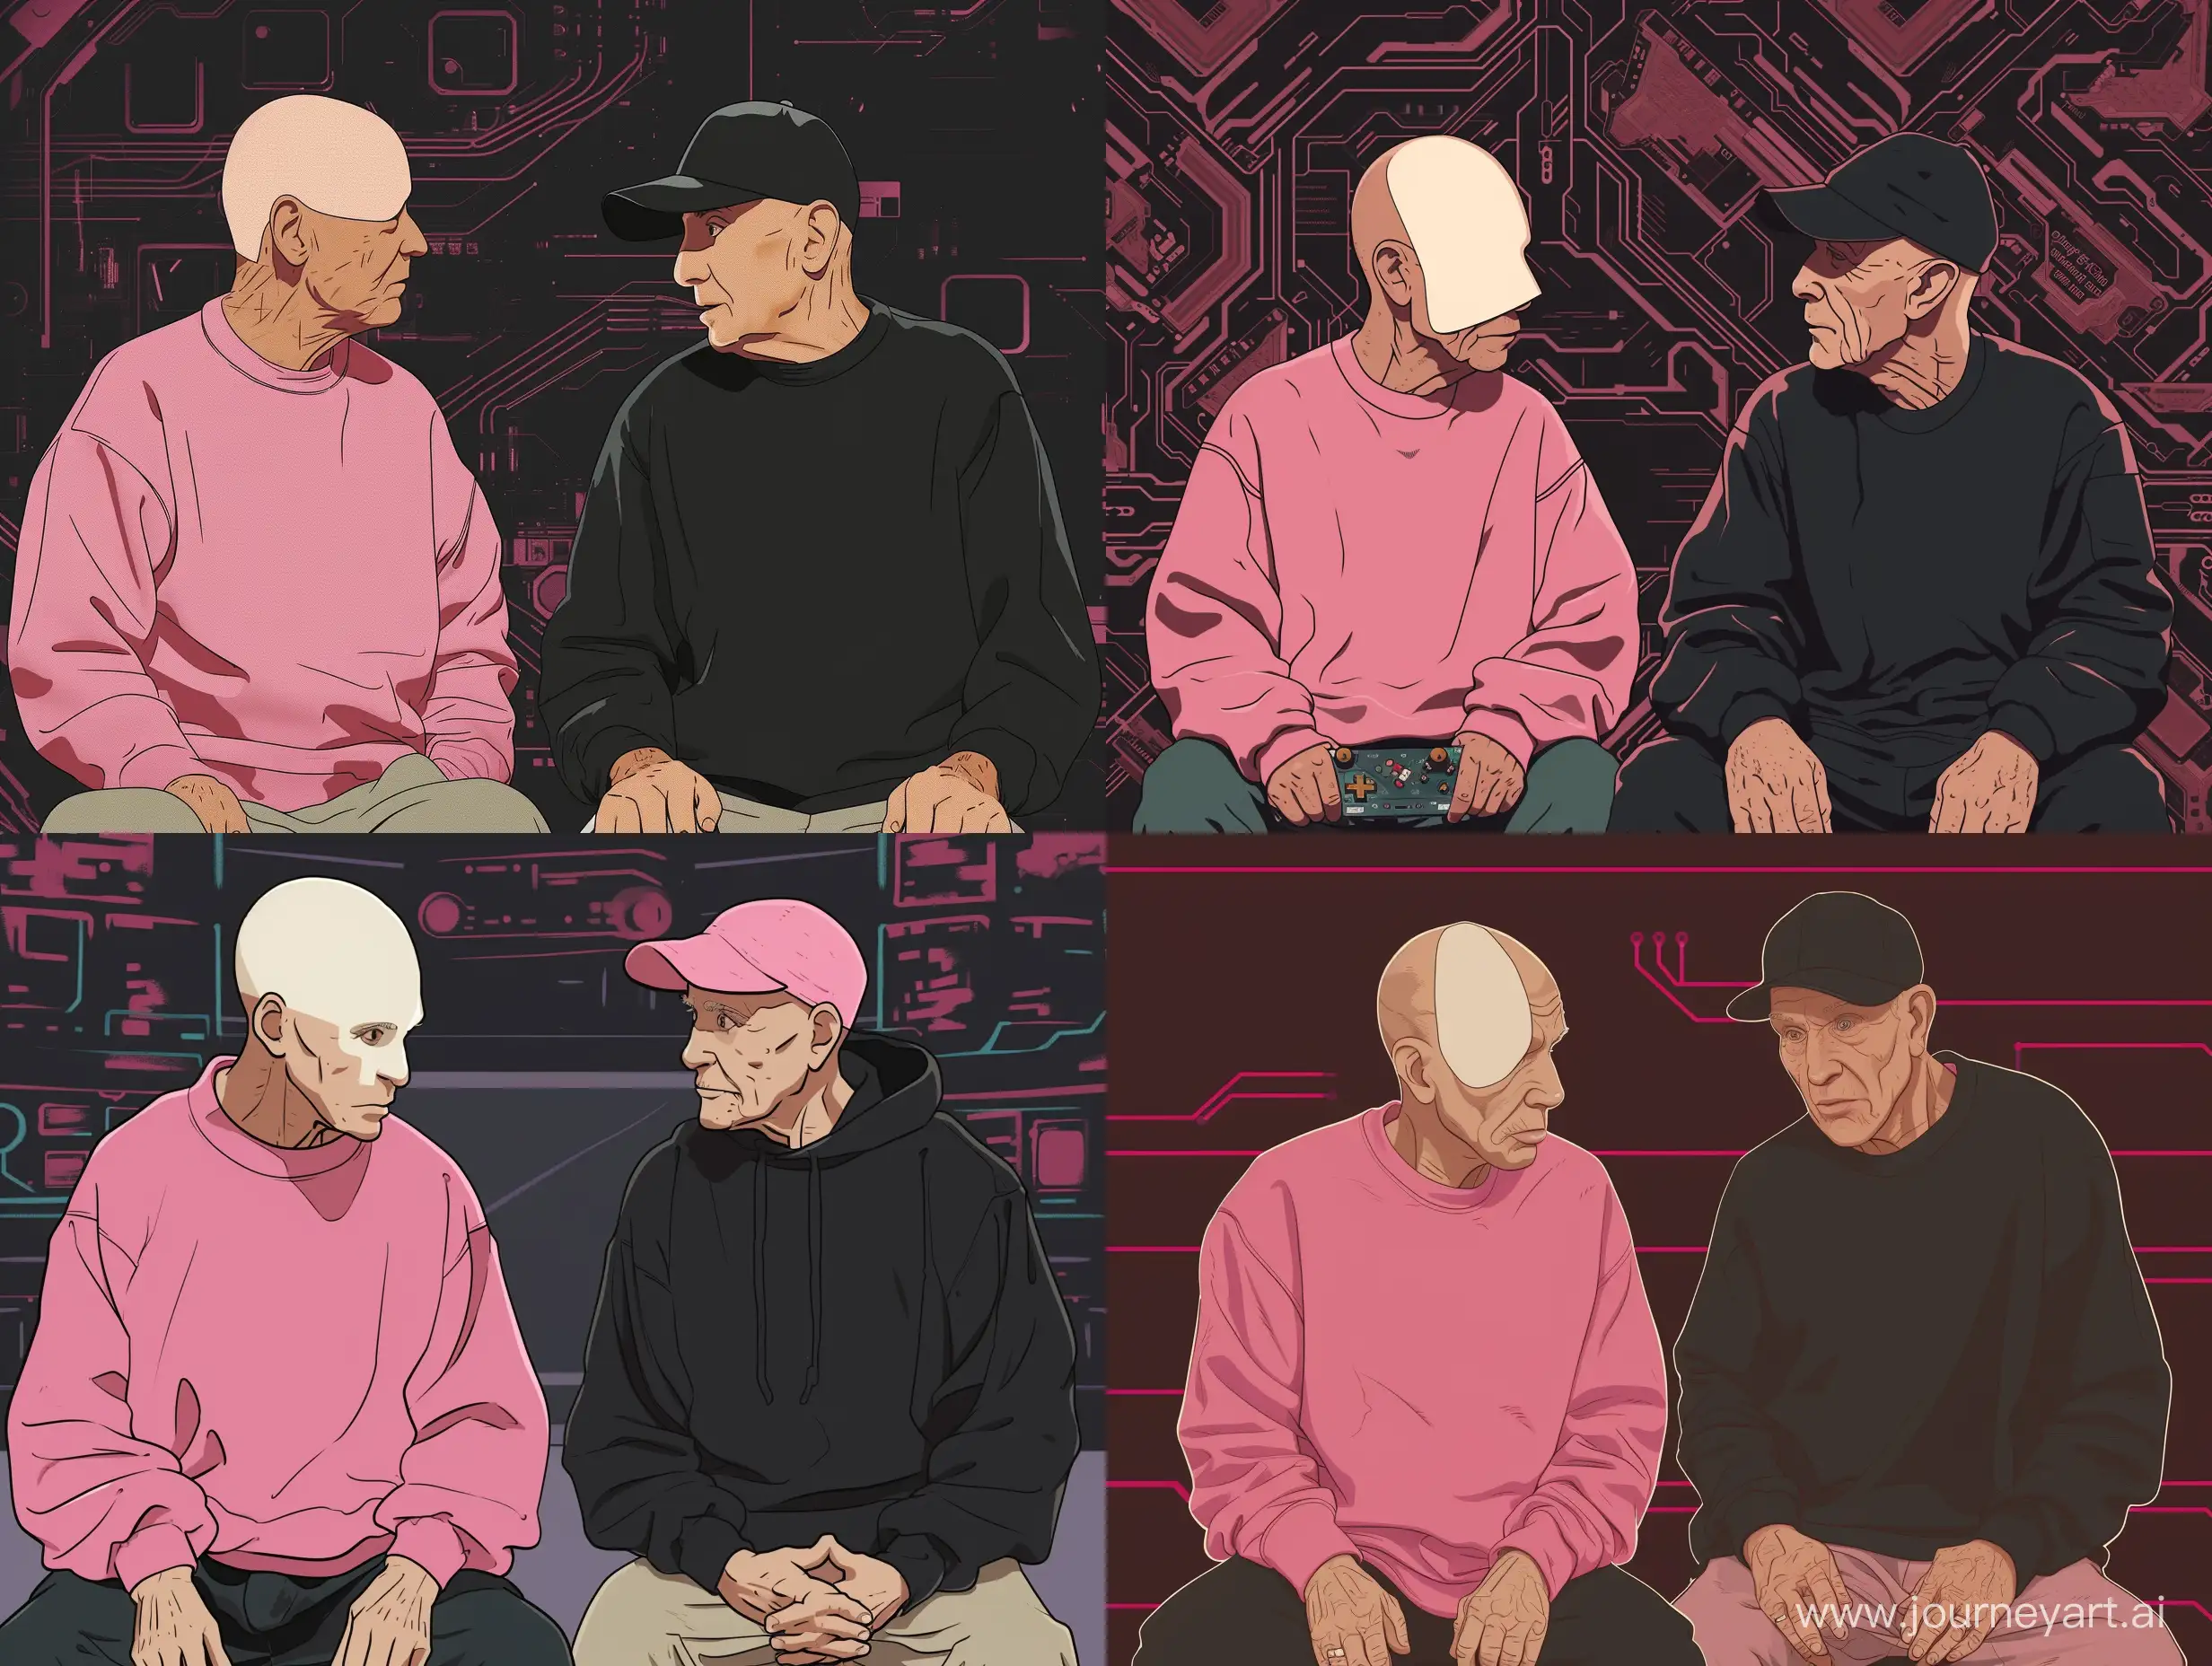 one old bald man wearing a pink sweatshirt with a blank head without any hat on it and another old bald man wearing a black sweatshirt has a baseball cap on his head sitting and discussing retro games, hi-tech background, comic image style